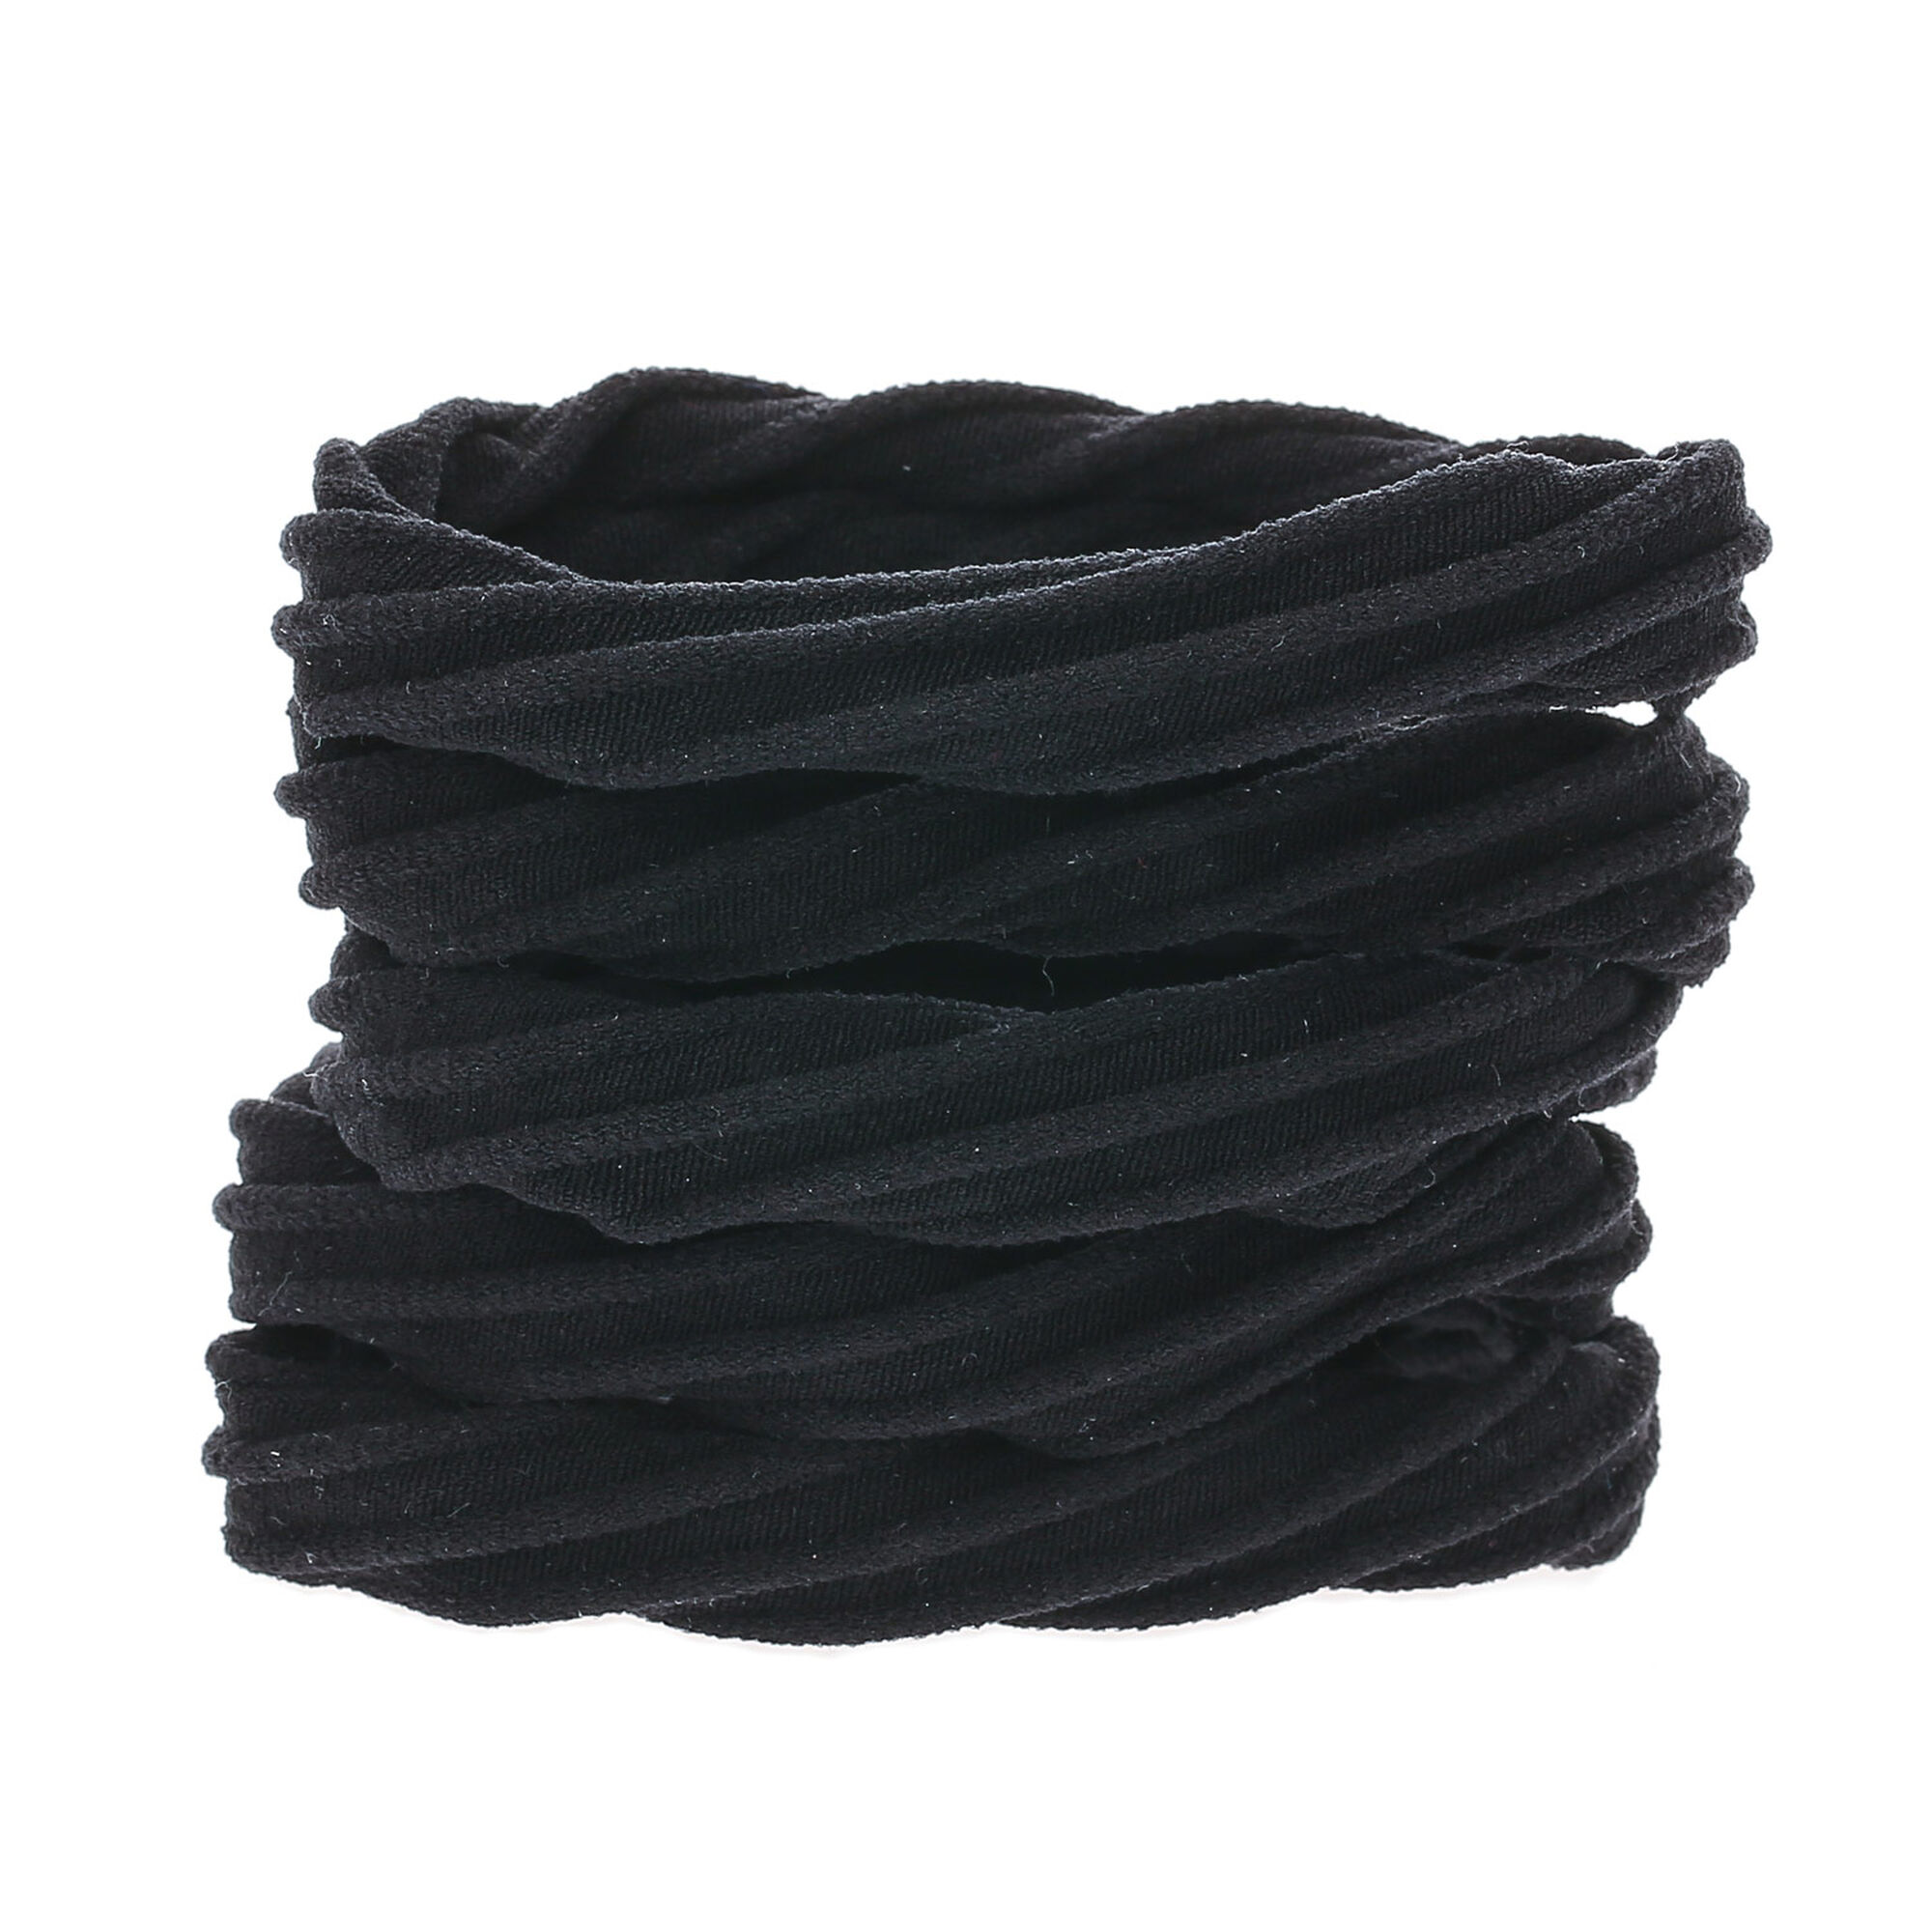 View Claires Twisted Hair Bobbles Black 5 Pack information